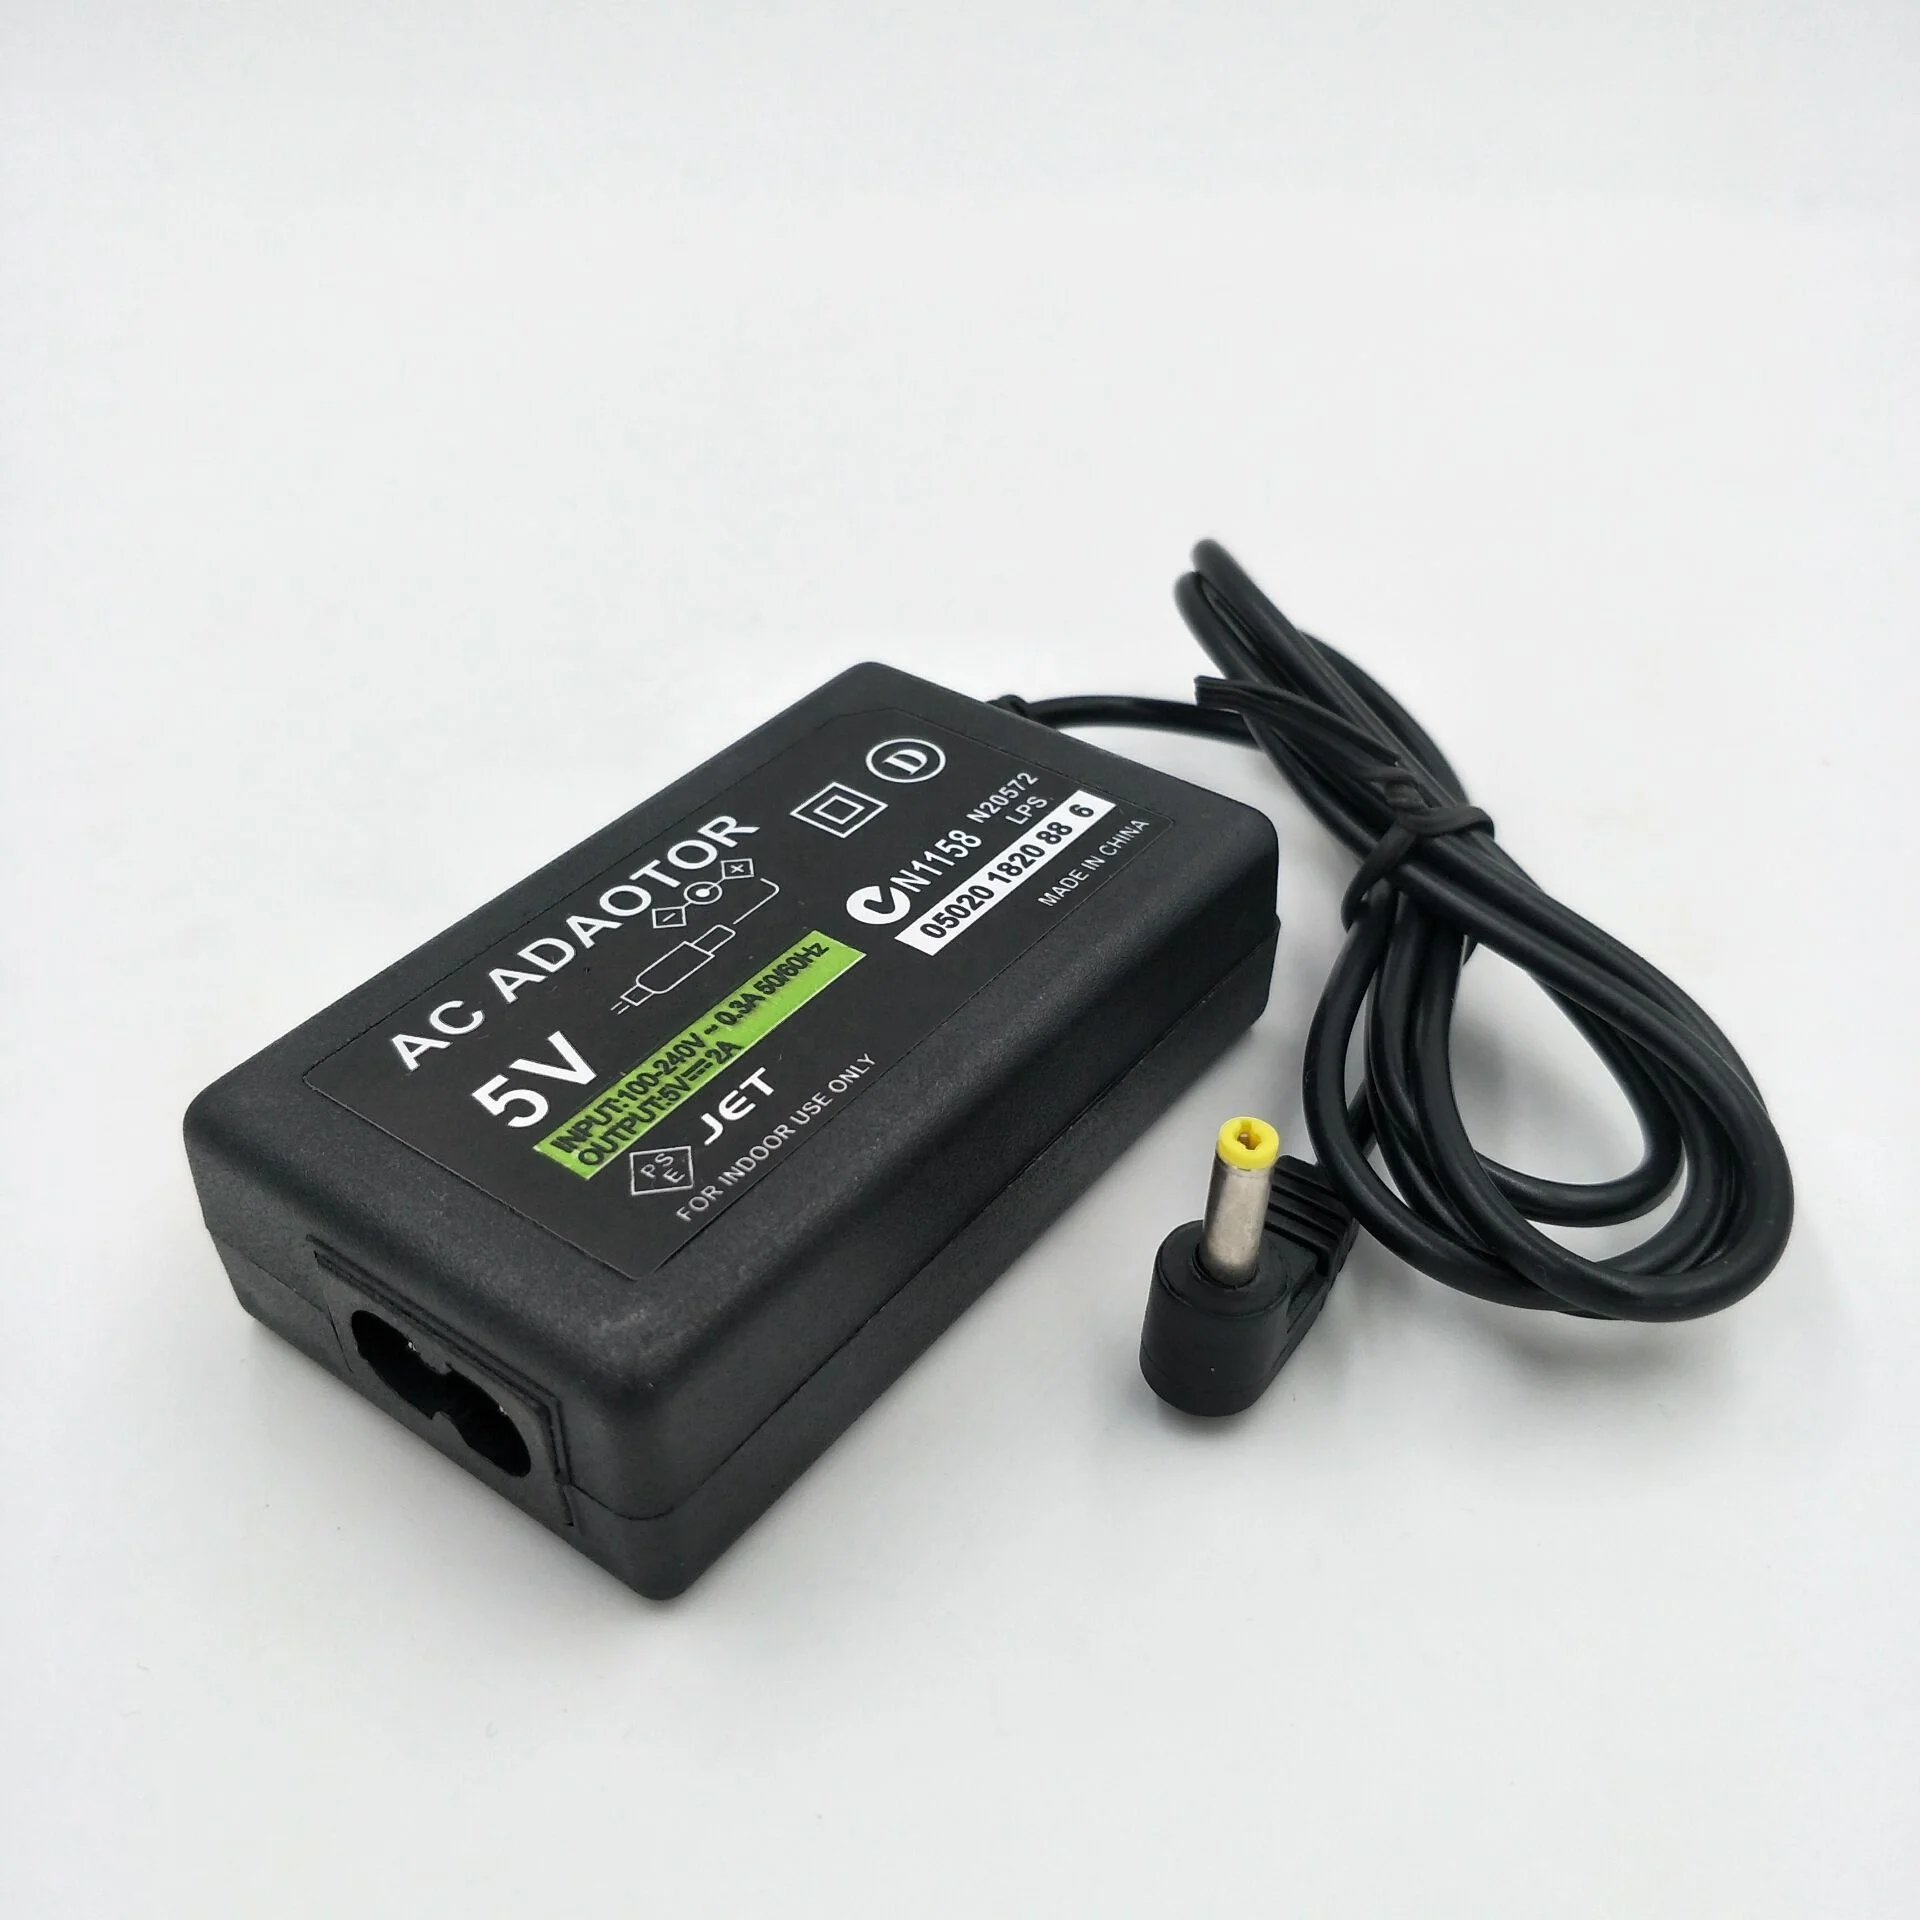 Eu Us Plug 5v Home Wall Charger Power Supply Ac Adapter For Sony Playstation Portable Psp 1000 00 3000 Charging Cable Cord Buy Ac Adapter Power Supply For Psp 00 3000 Home Wall